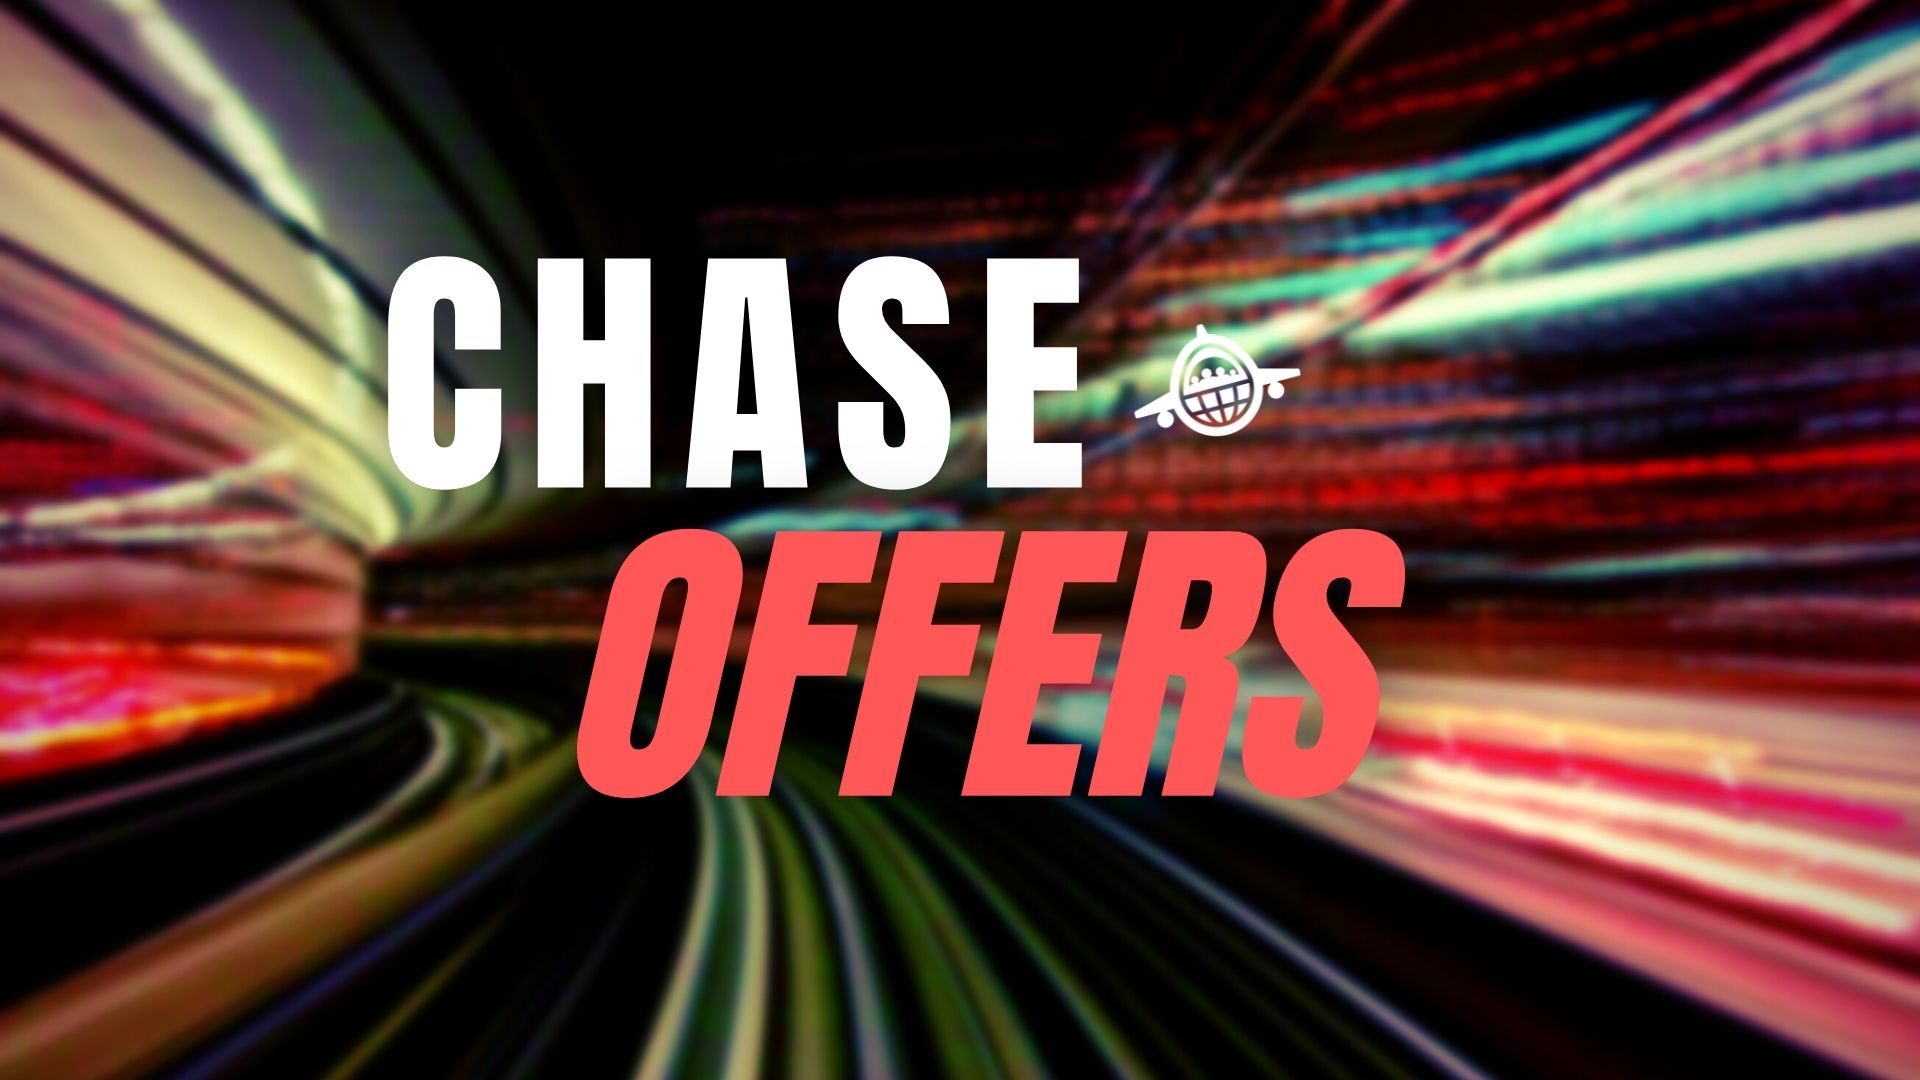 in the southwest 10% discount on the chase